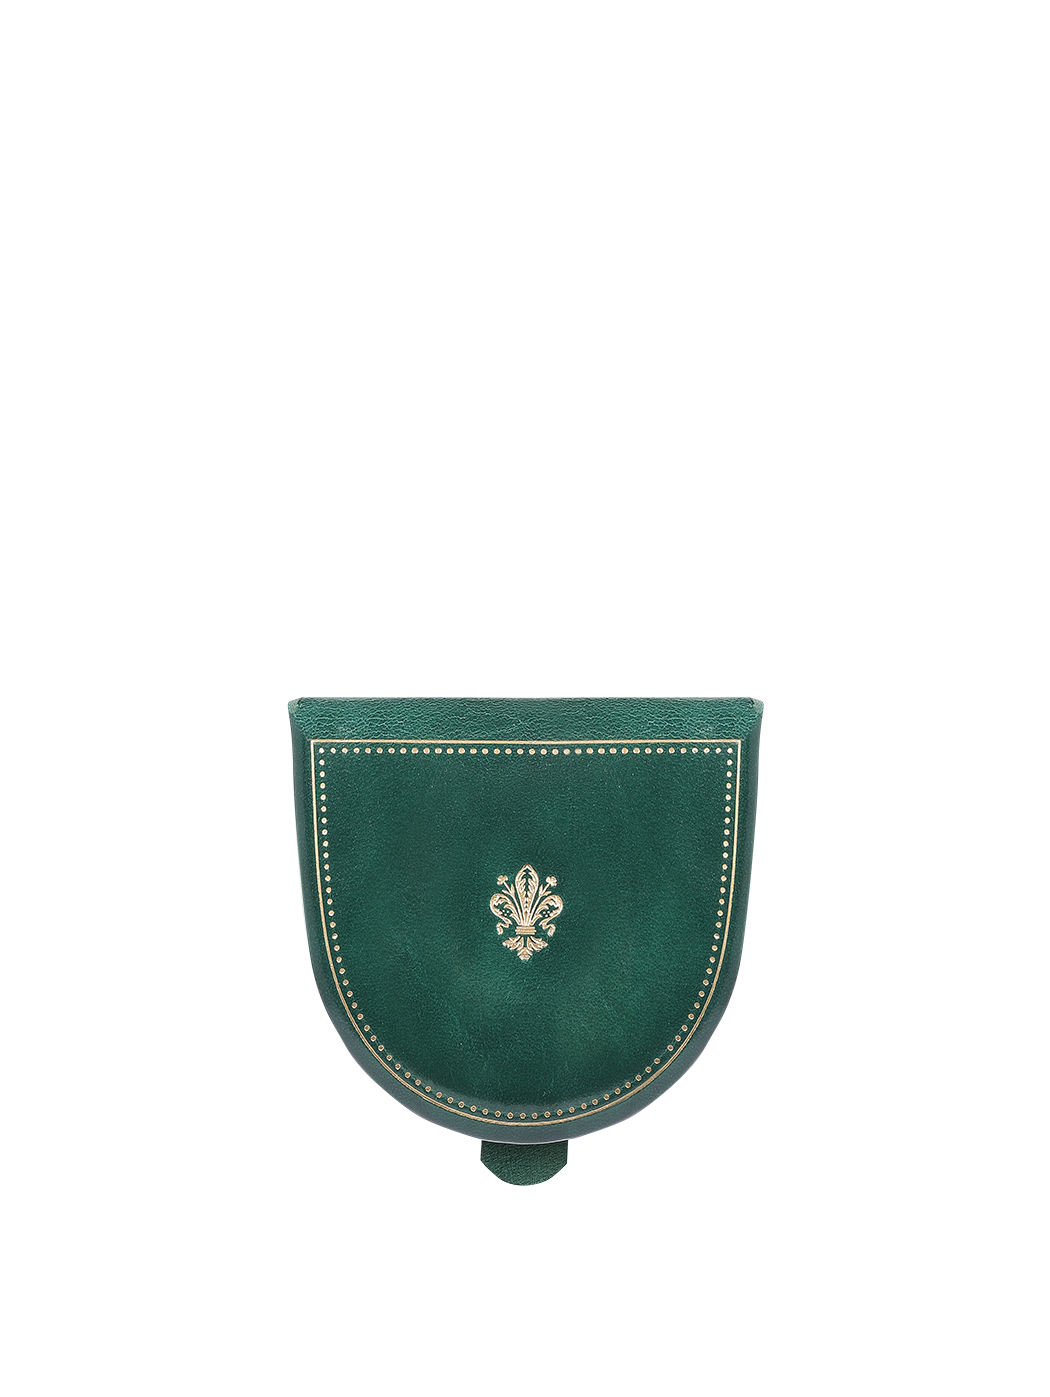 Florentine Lily Tacco Coin Pouch Green